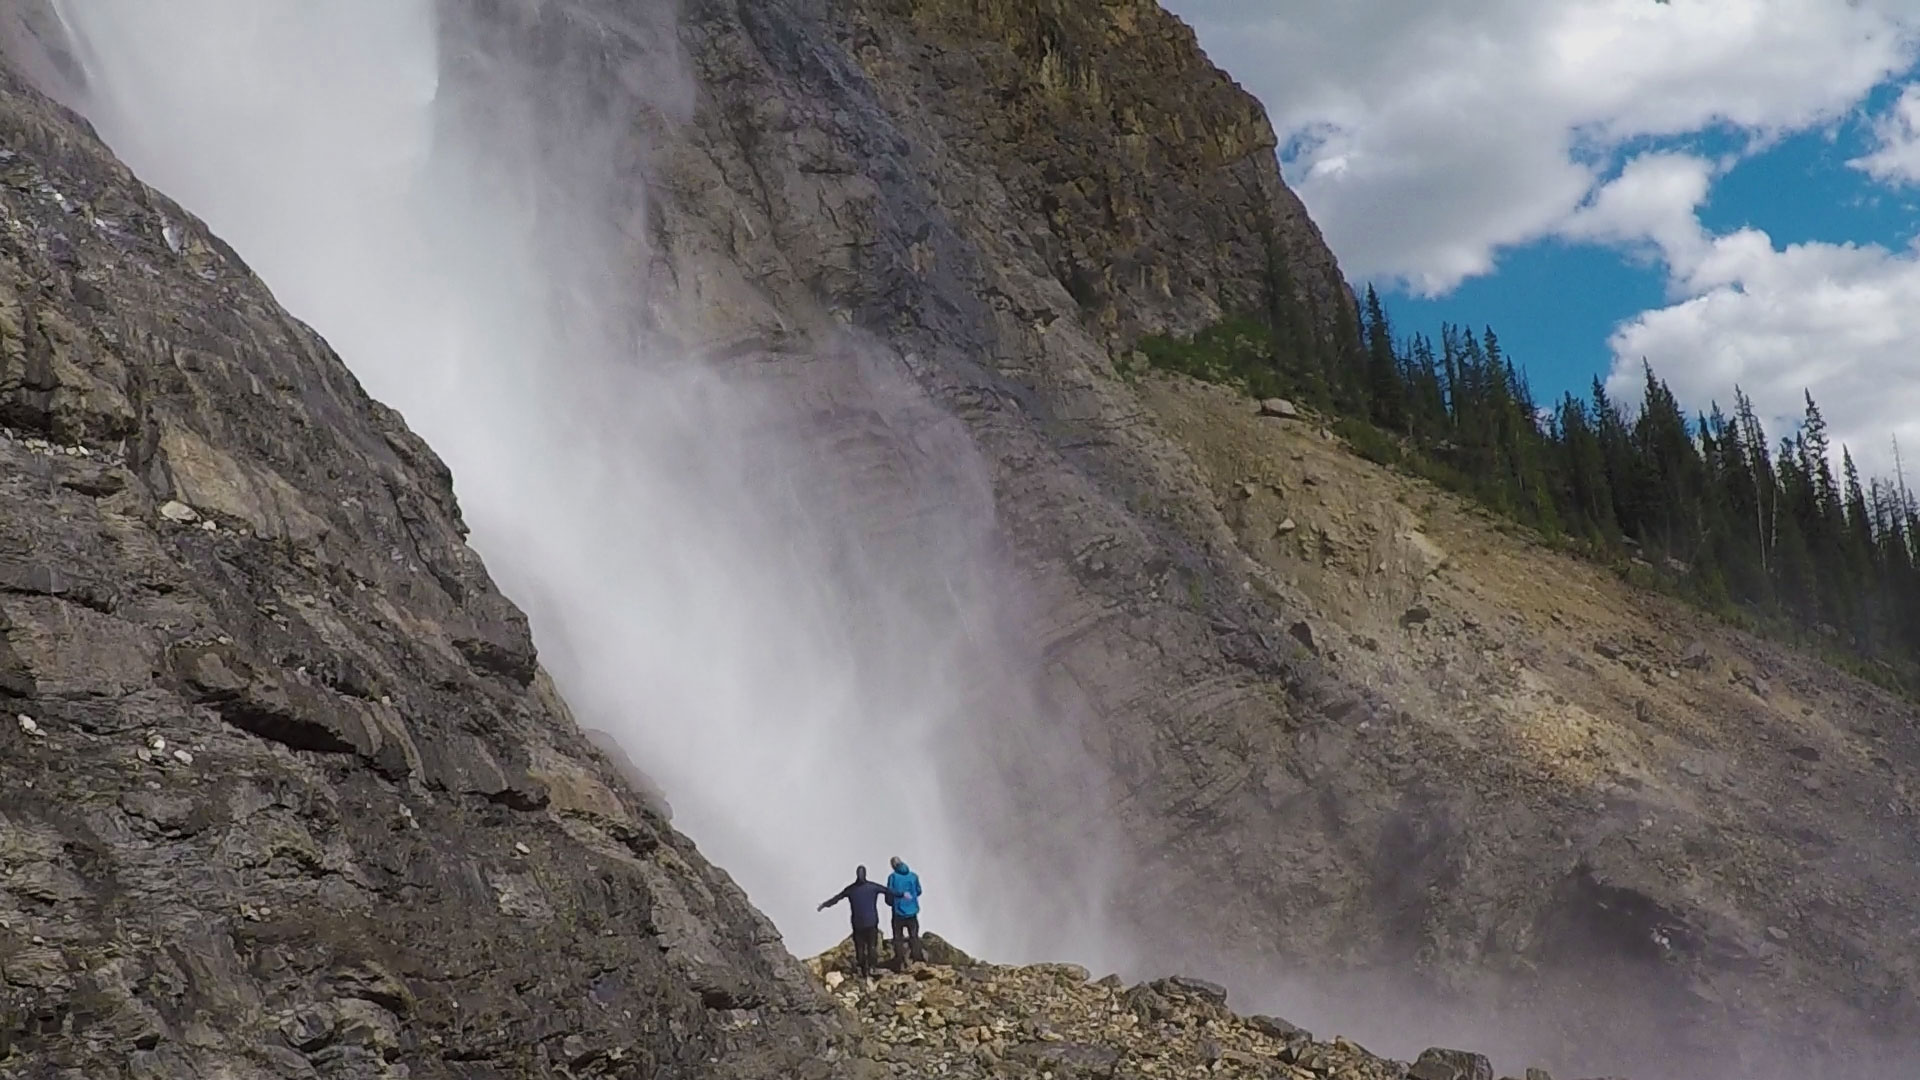 Guided adventure in Yoho National Park.